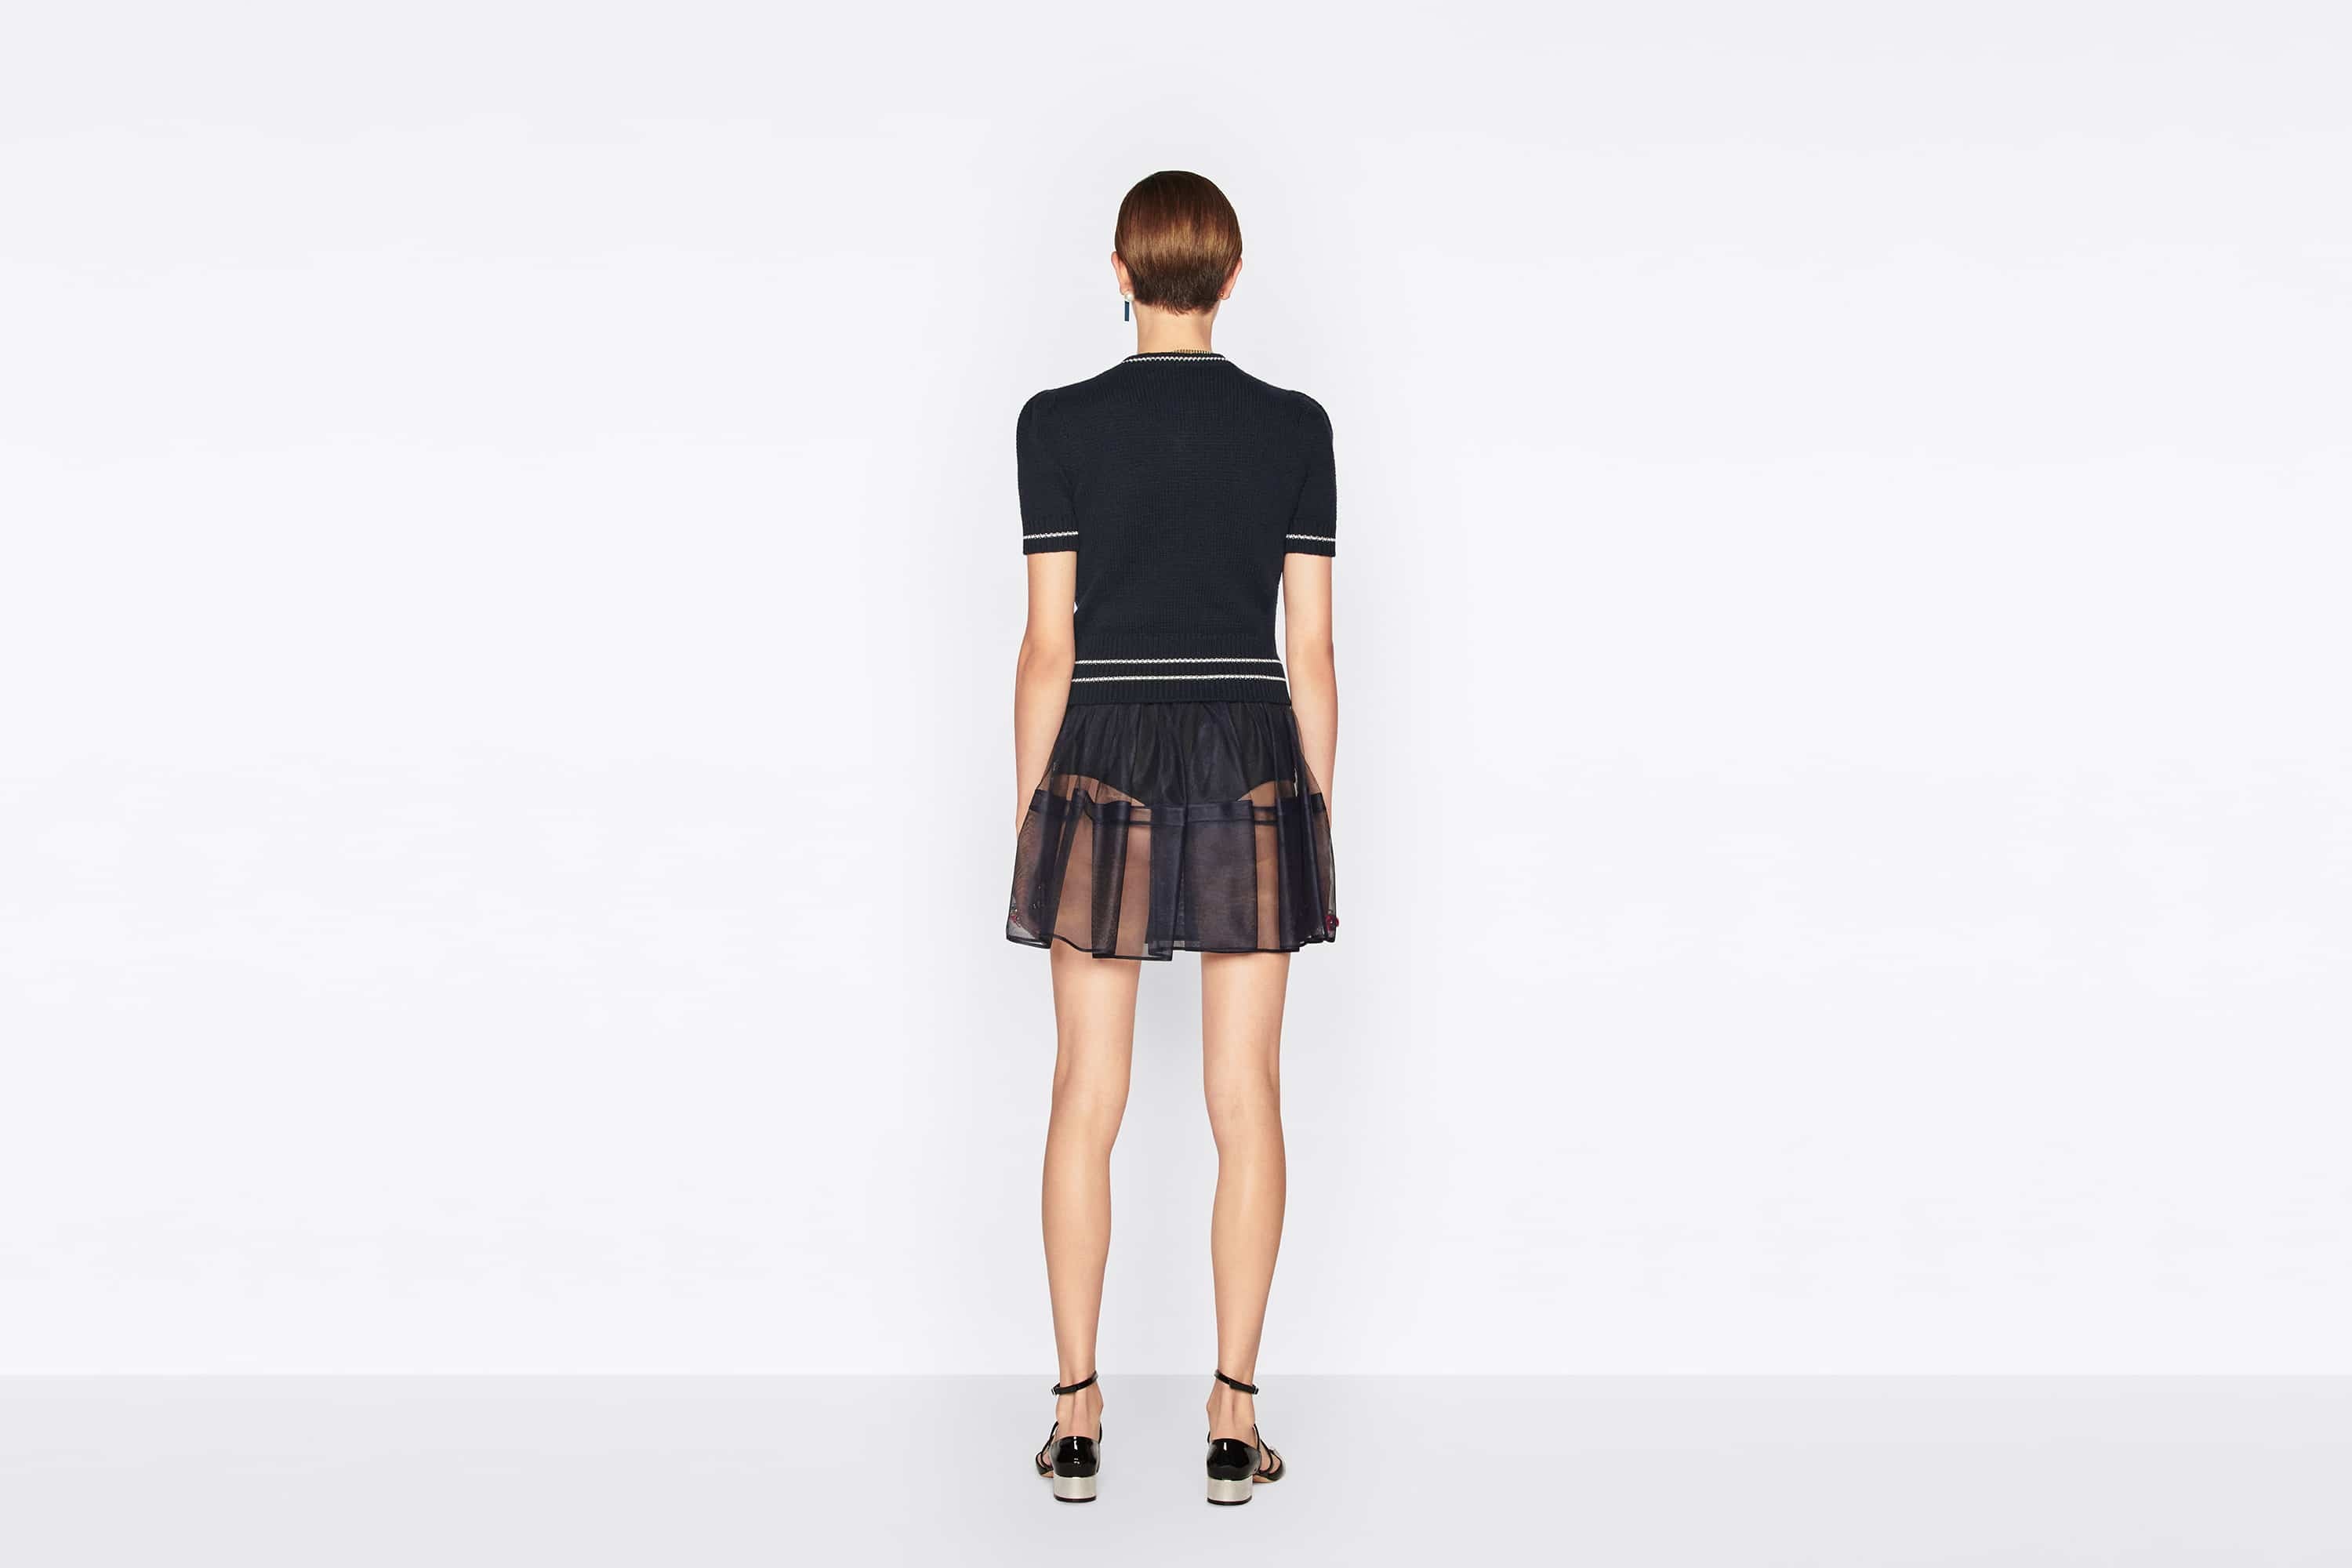 'CHRISTIAN DIOR' Short-Sleeved Sweater - 6